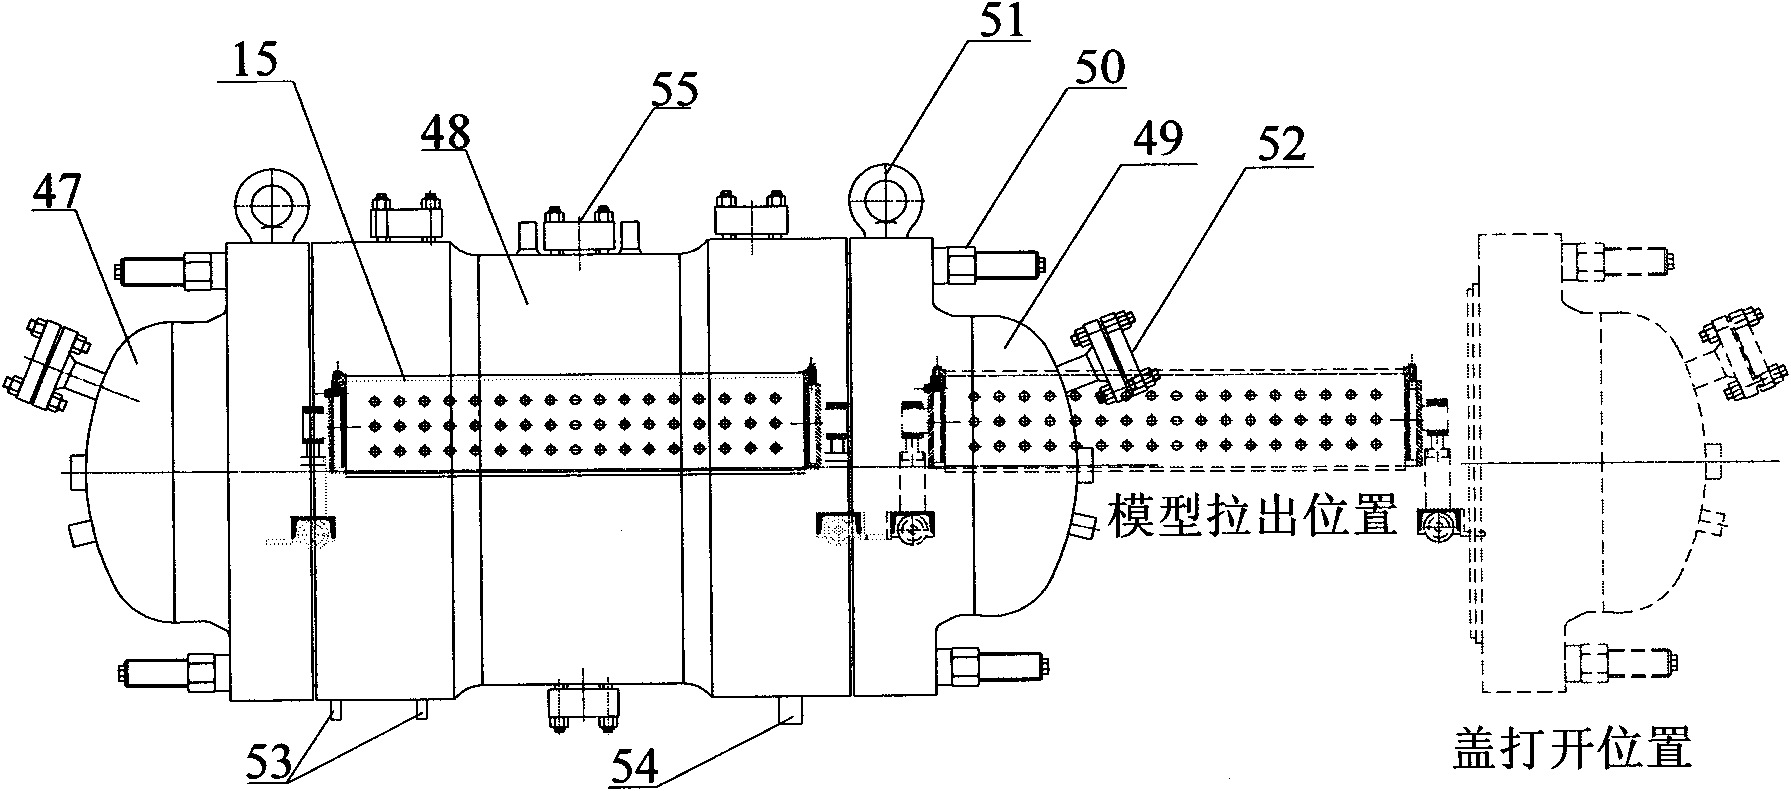 Three-dimensional simulation test device for oil extraction by injecting multielement hot fluid